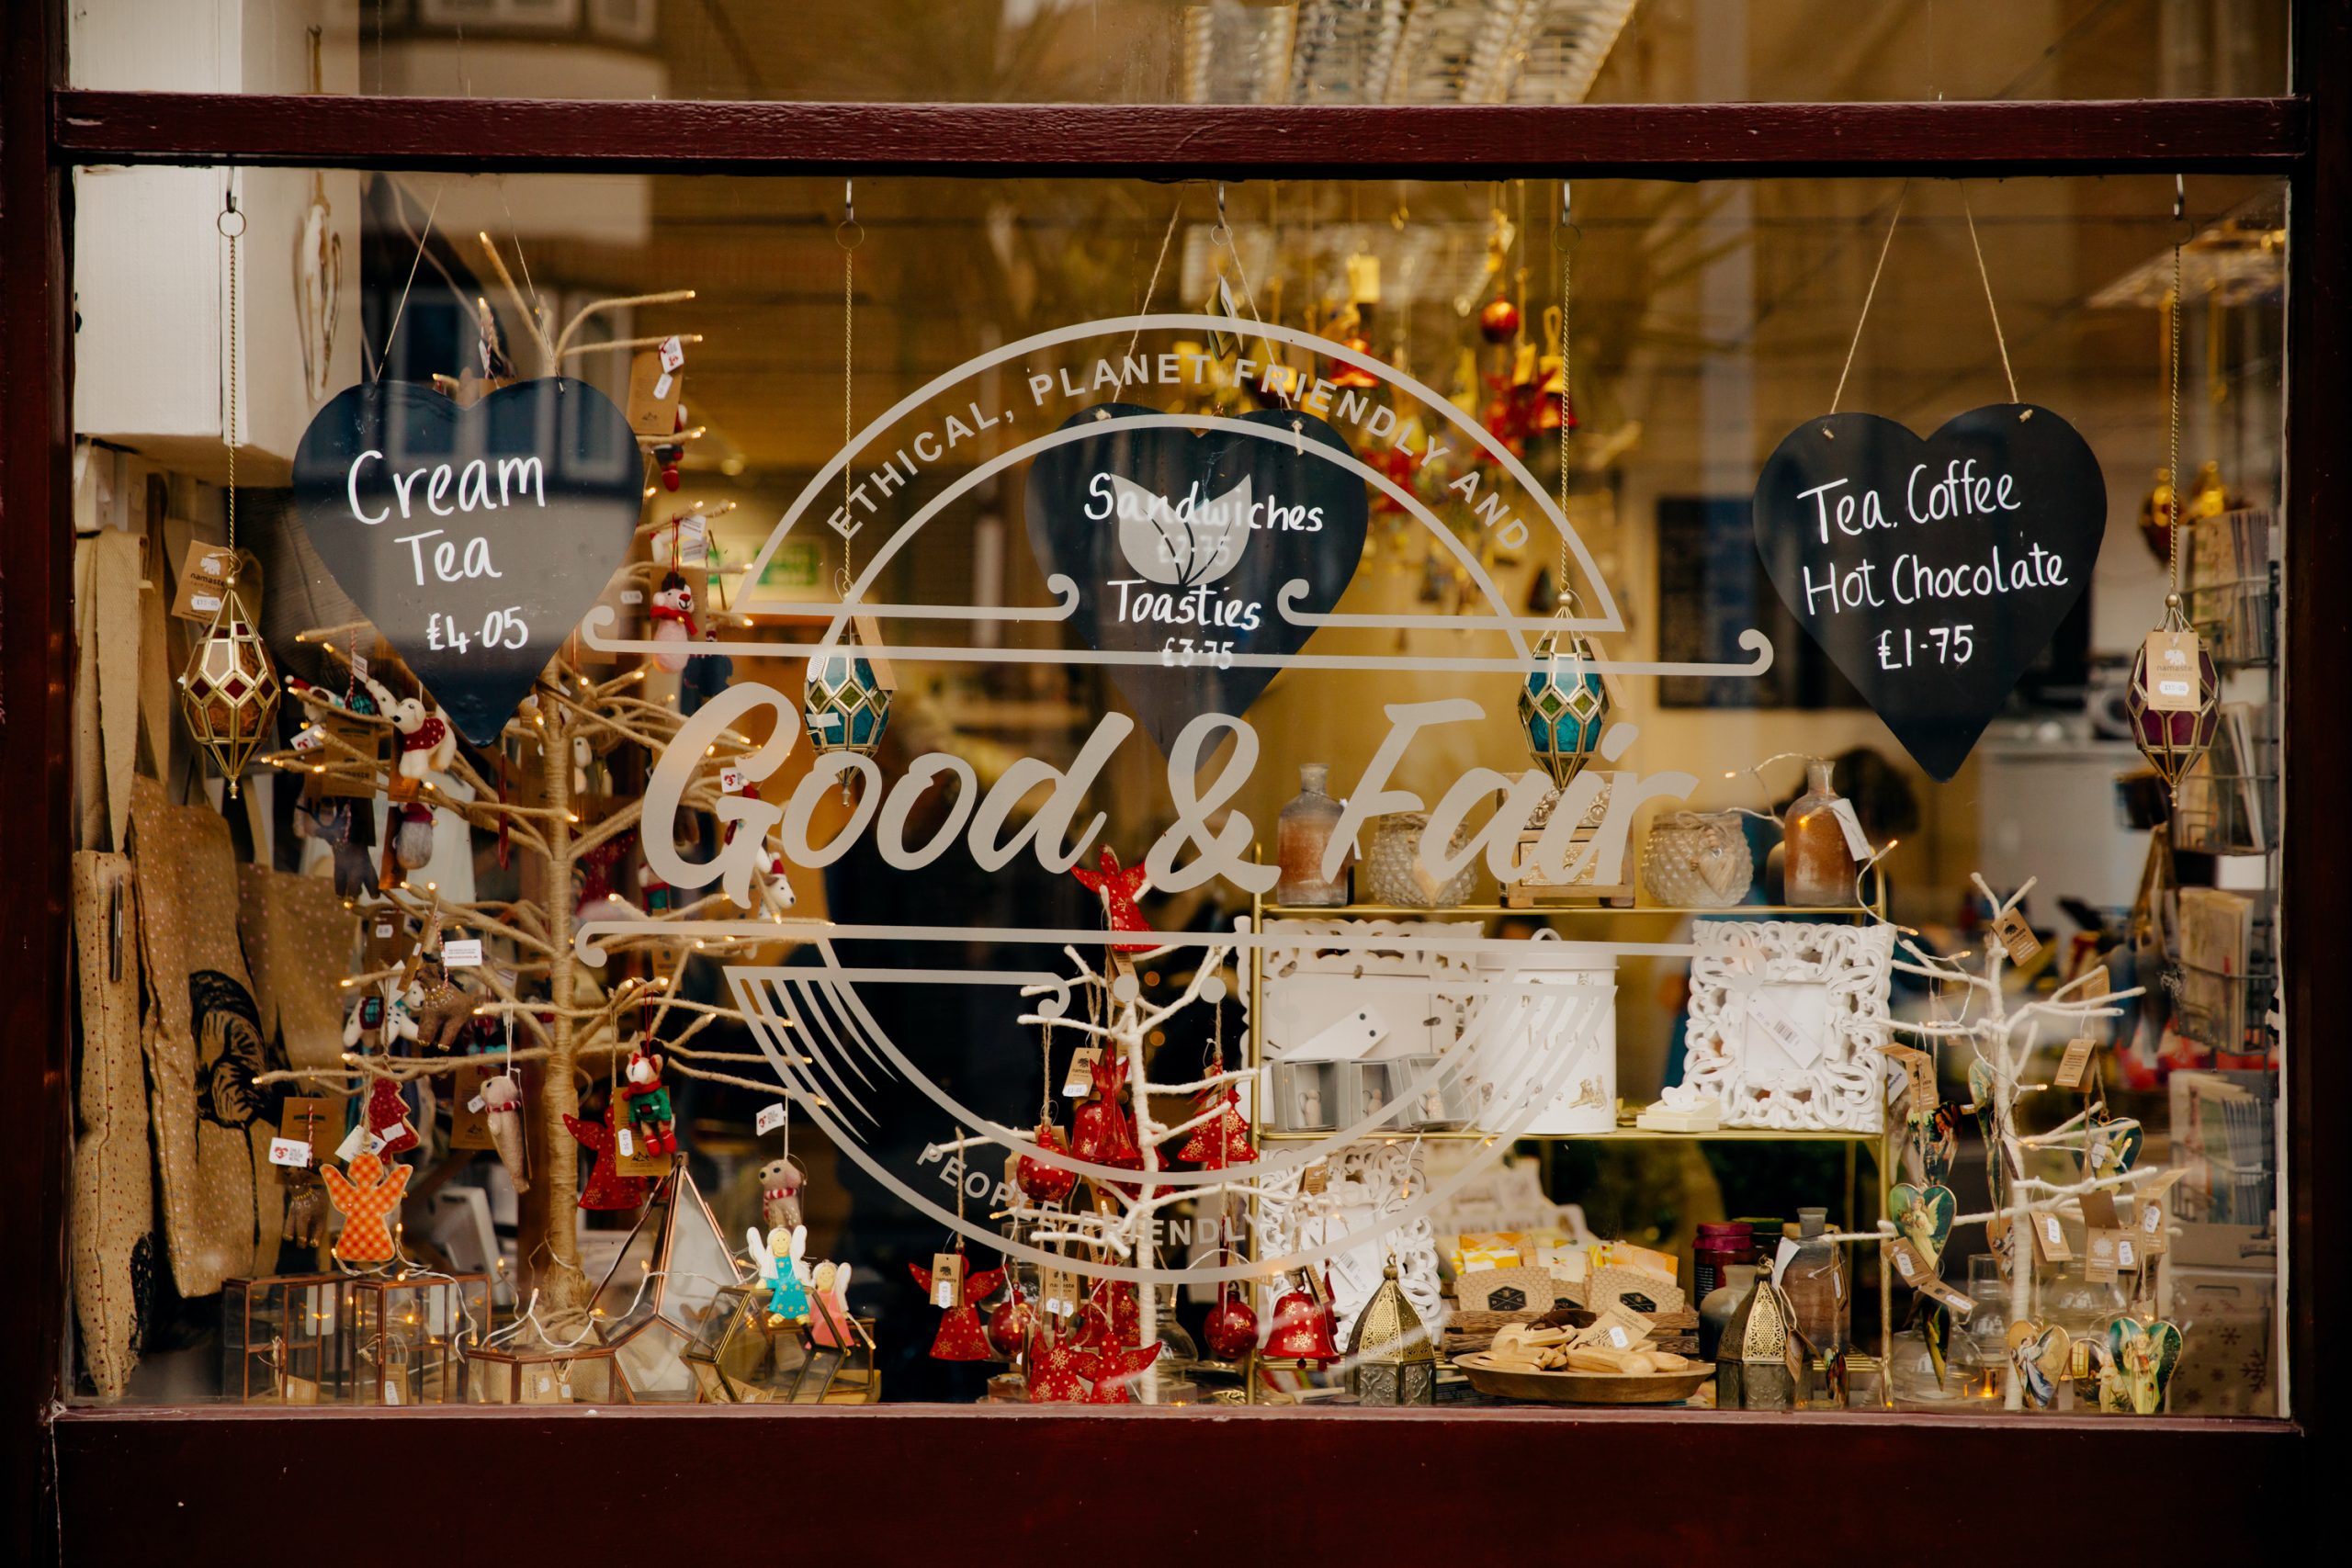 Good and Fair Shop, photo by Peter Flude